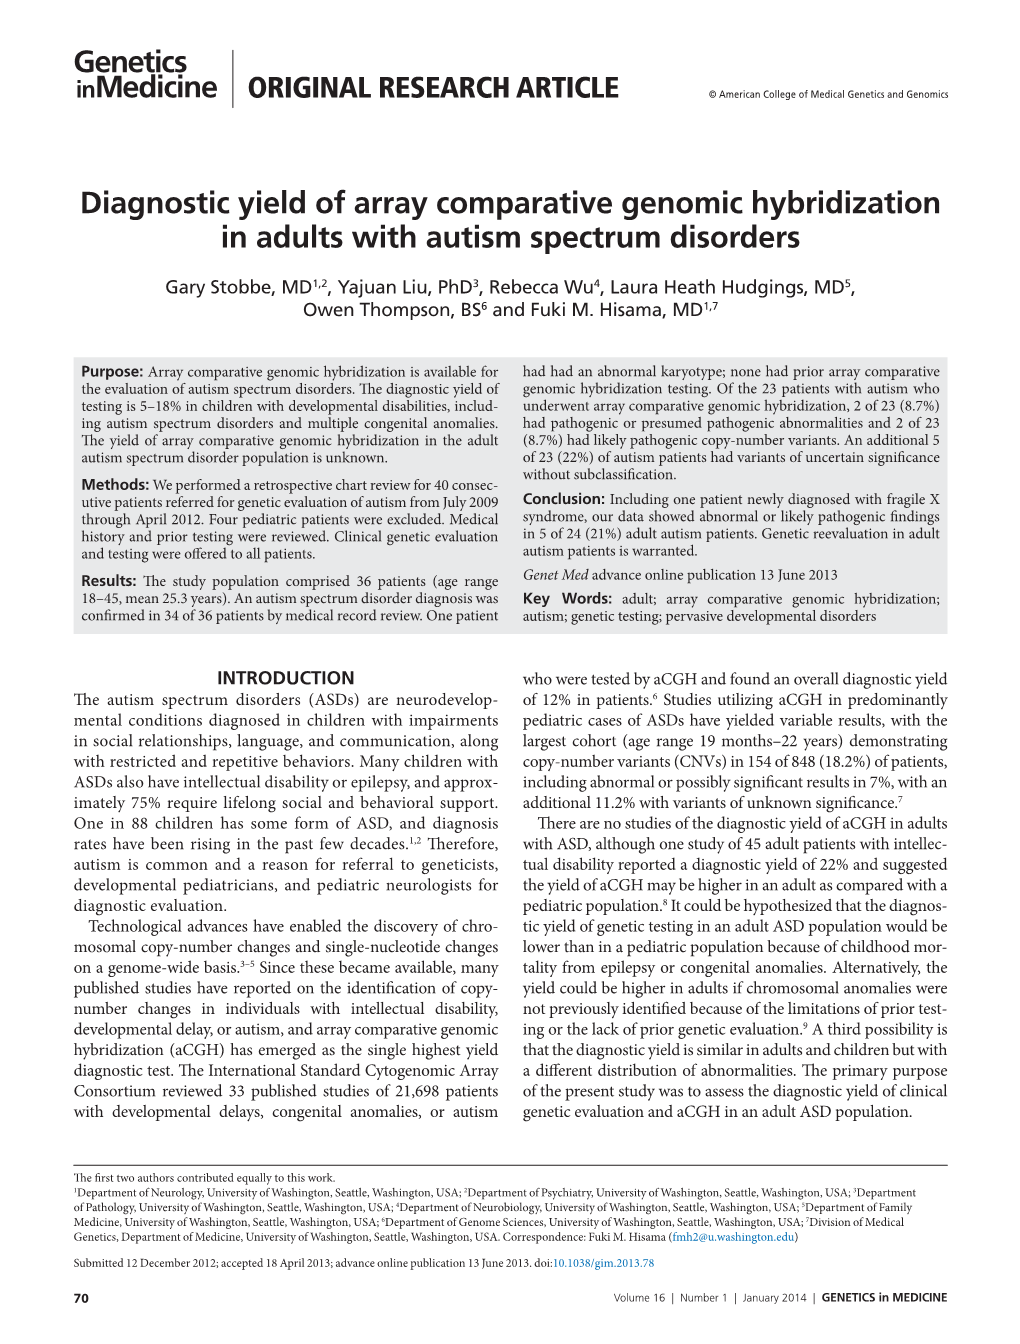 Diagnostic Yield of Array Comparative Genomic Hybridization in Adults with Autism Spectrum Disorders